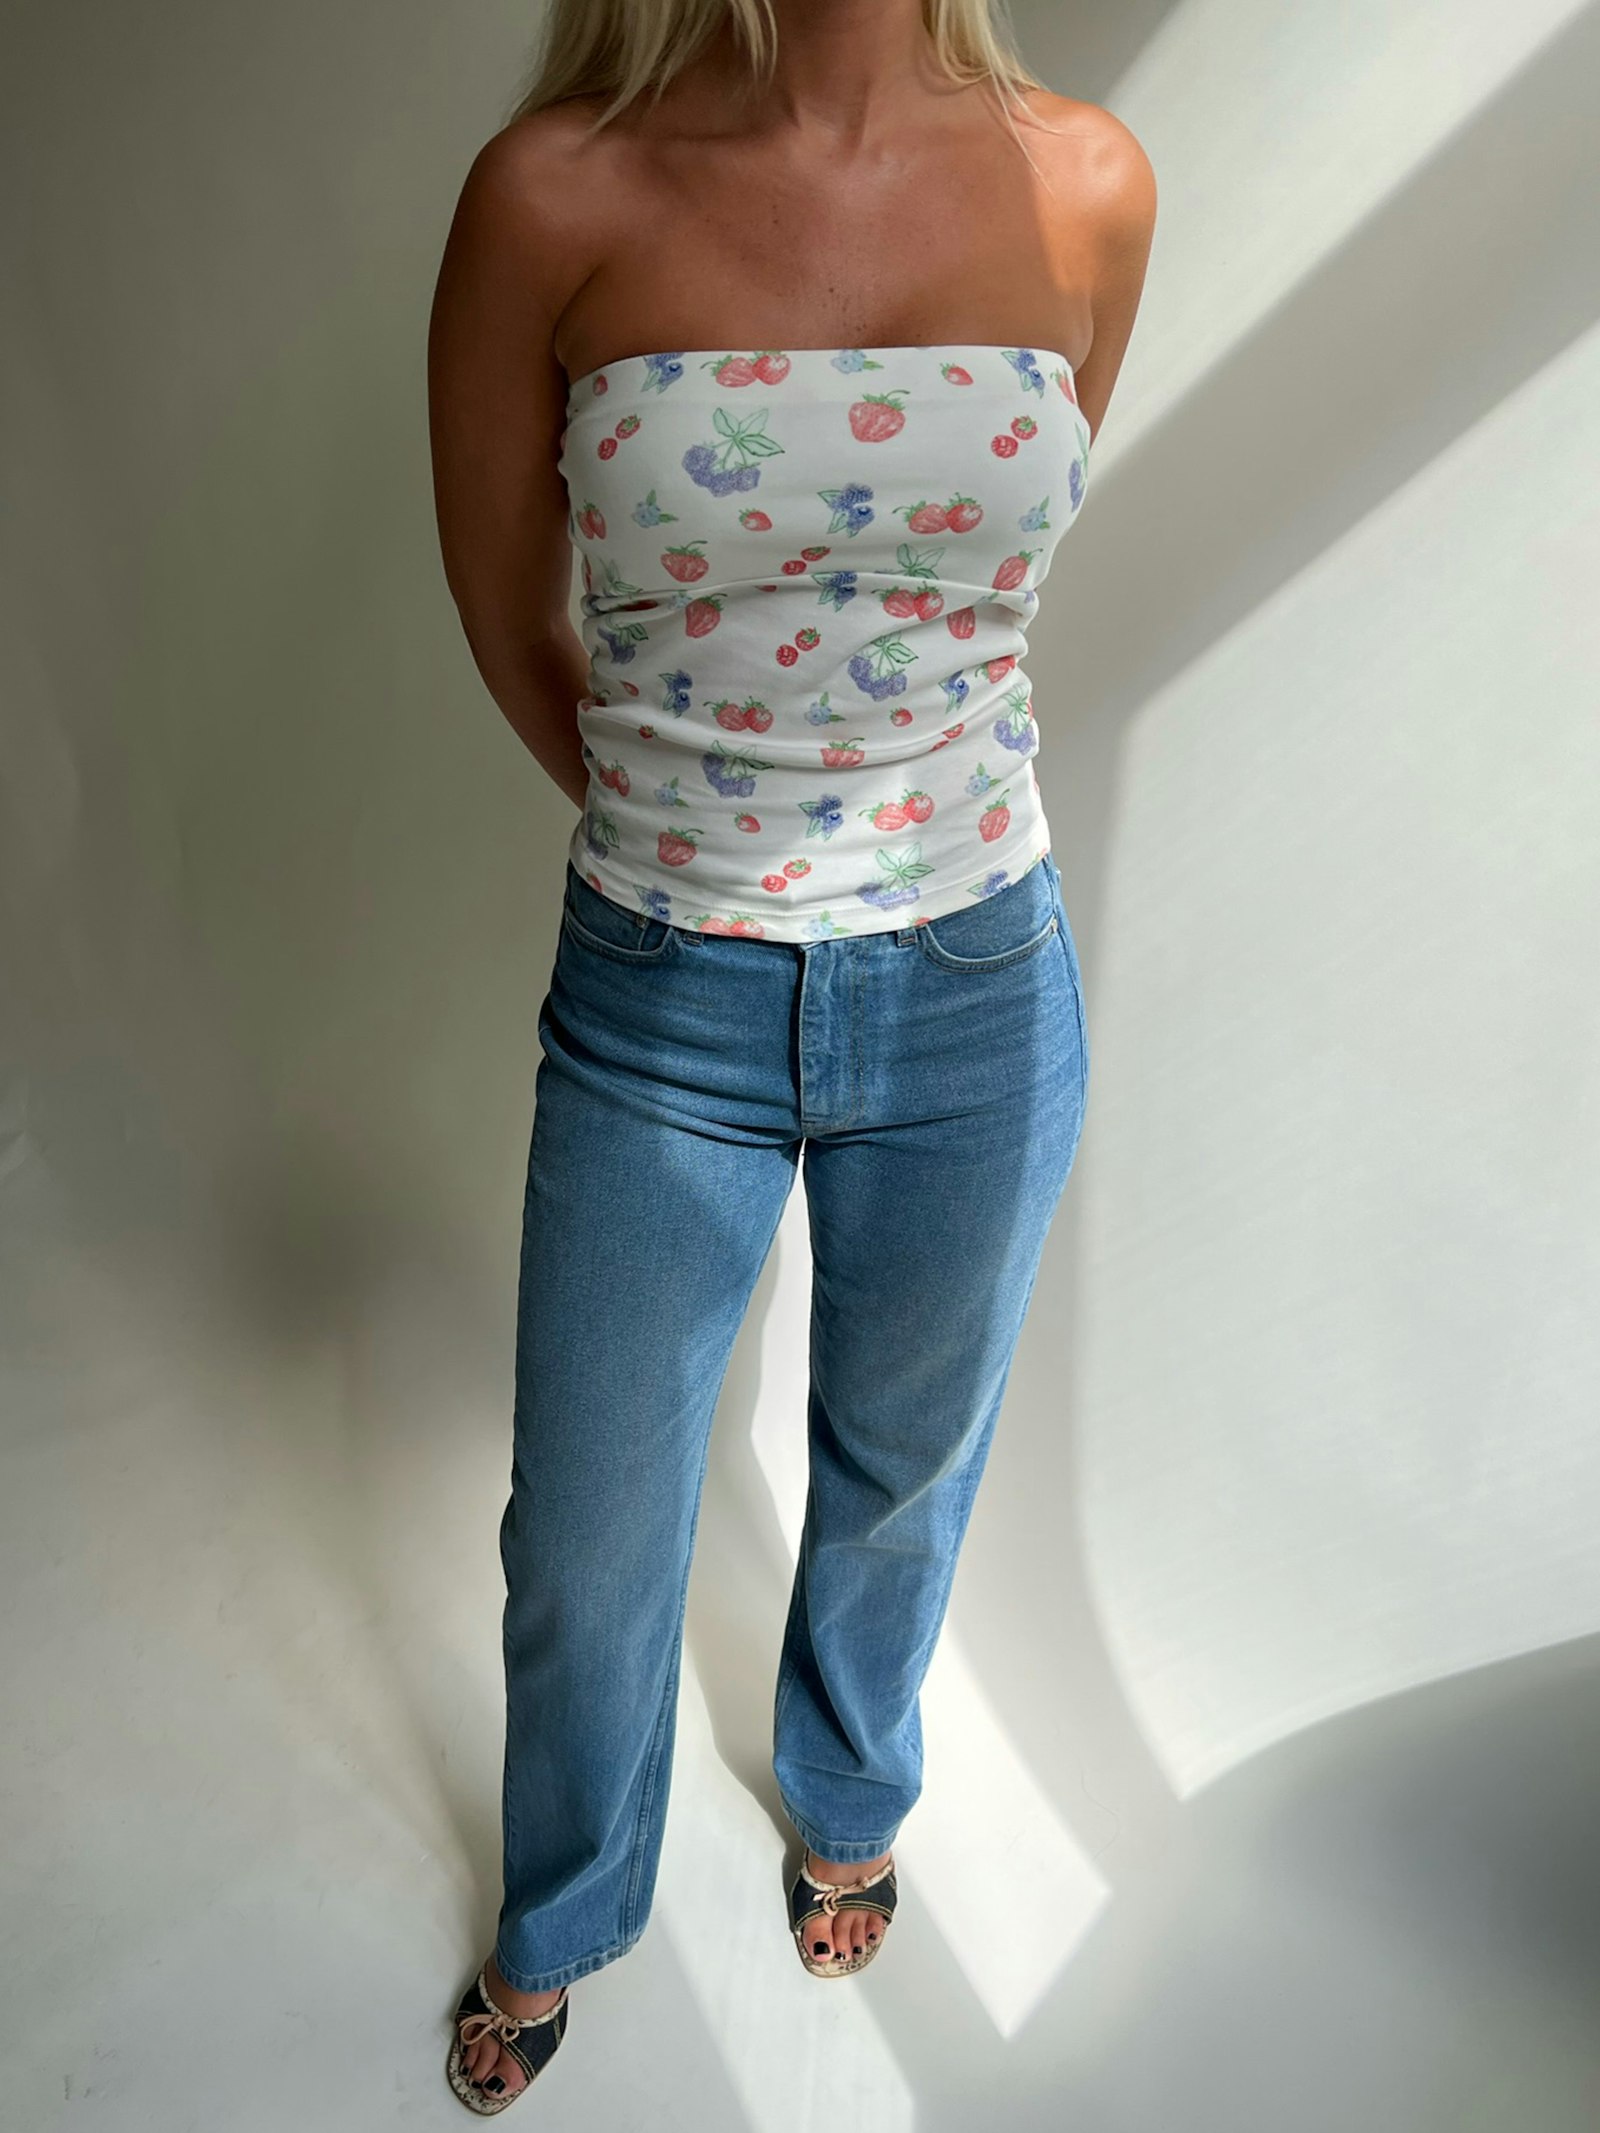 Our Daily Tube Top has a cute berry print, a soft jersey fabric